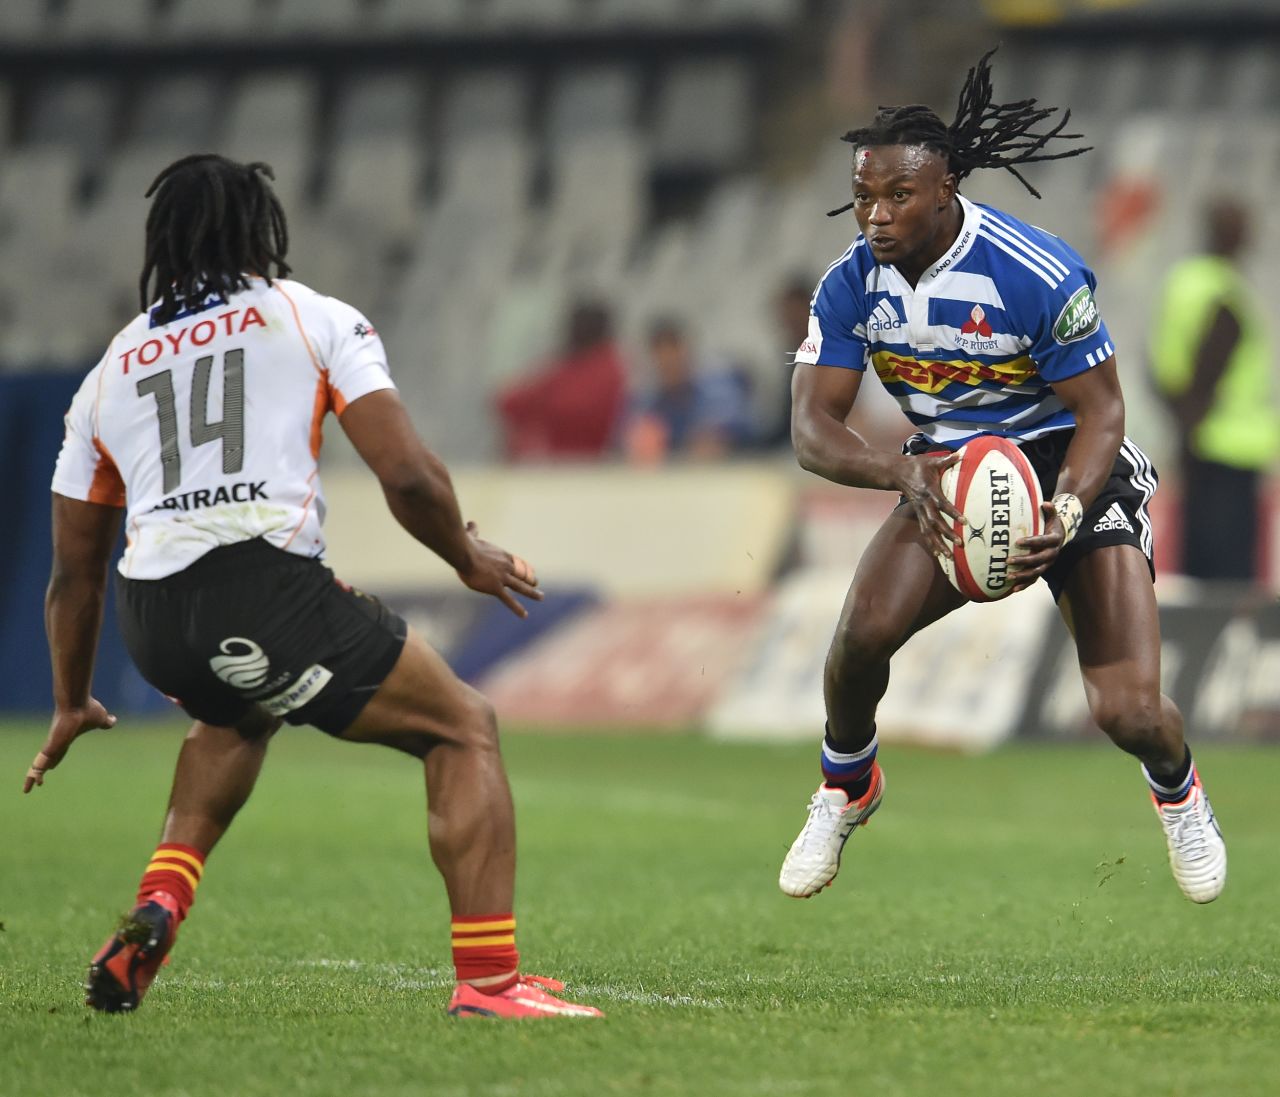 Here pictured playing for Western Province in South Africa's Currie Cup competition in 2015, Senatla is hoping to win a call-up to the Springboks squad.